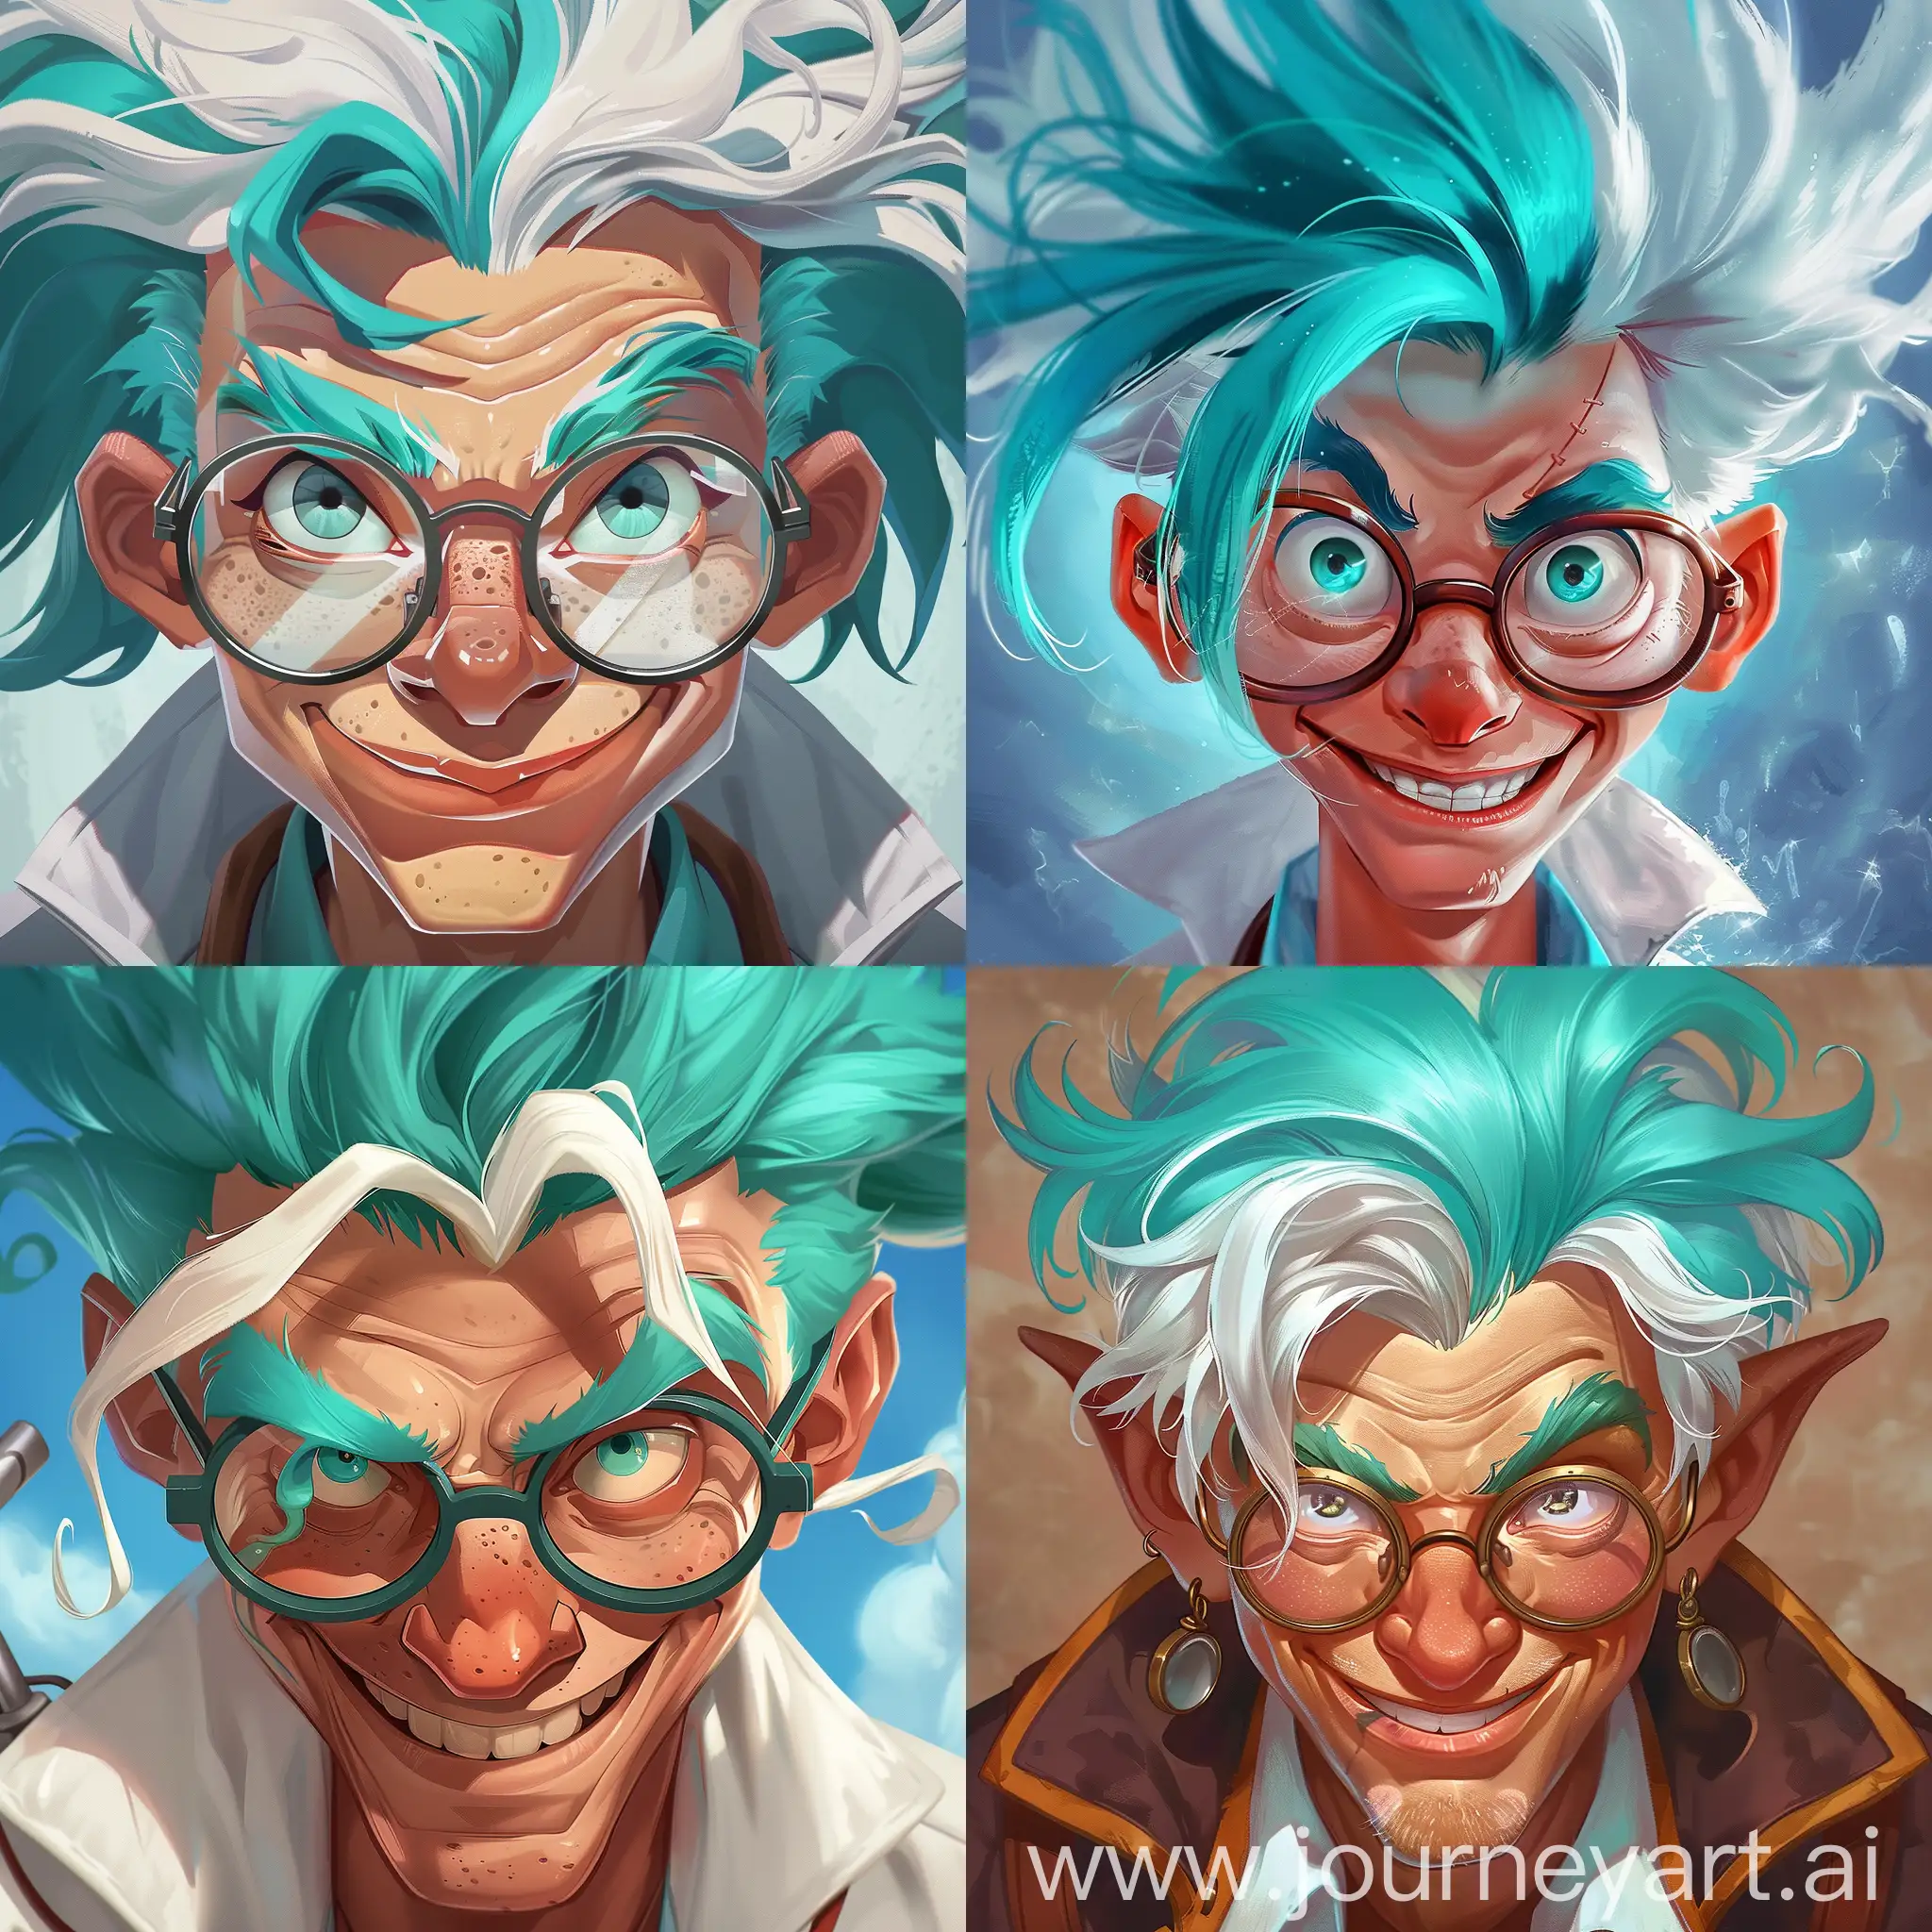 Genius-Doctor-Stone-with-White-Turquoise-Hair-Sharing-Worldly-Wisdom